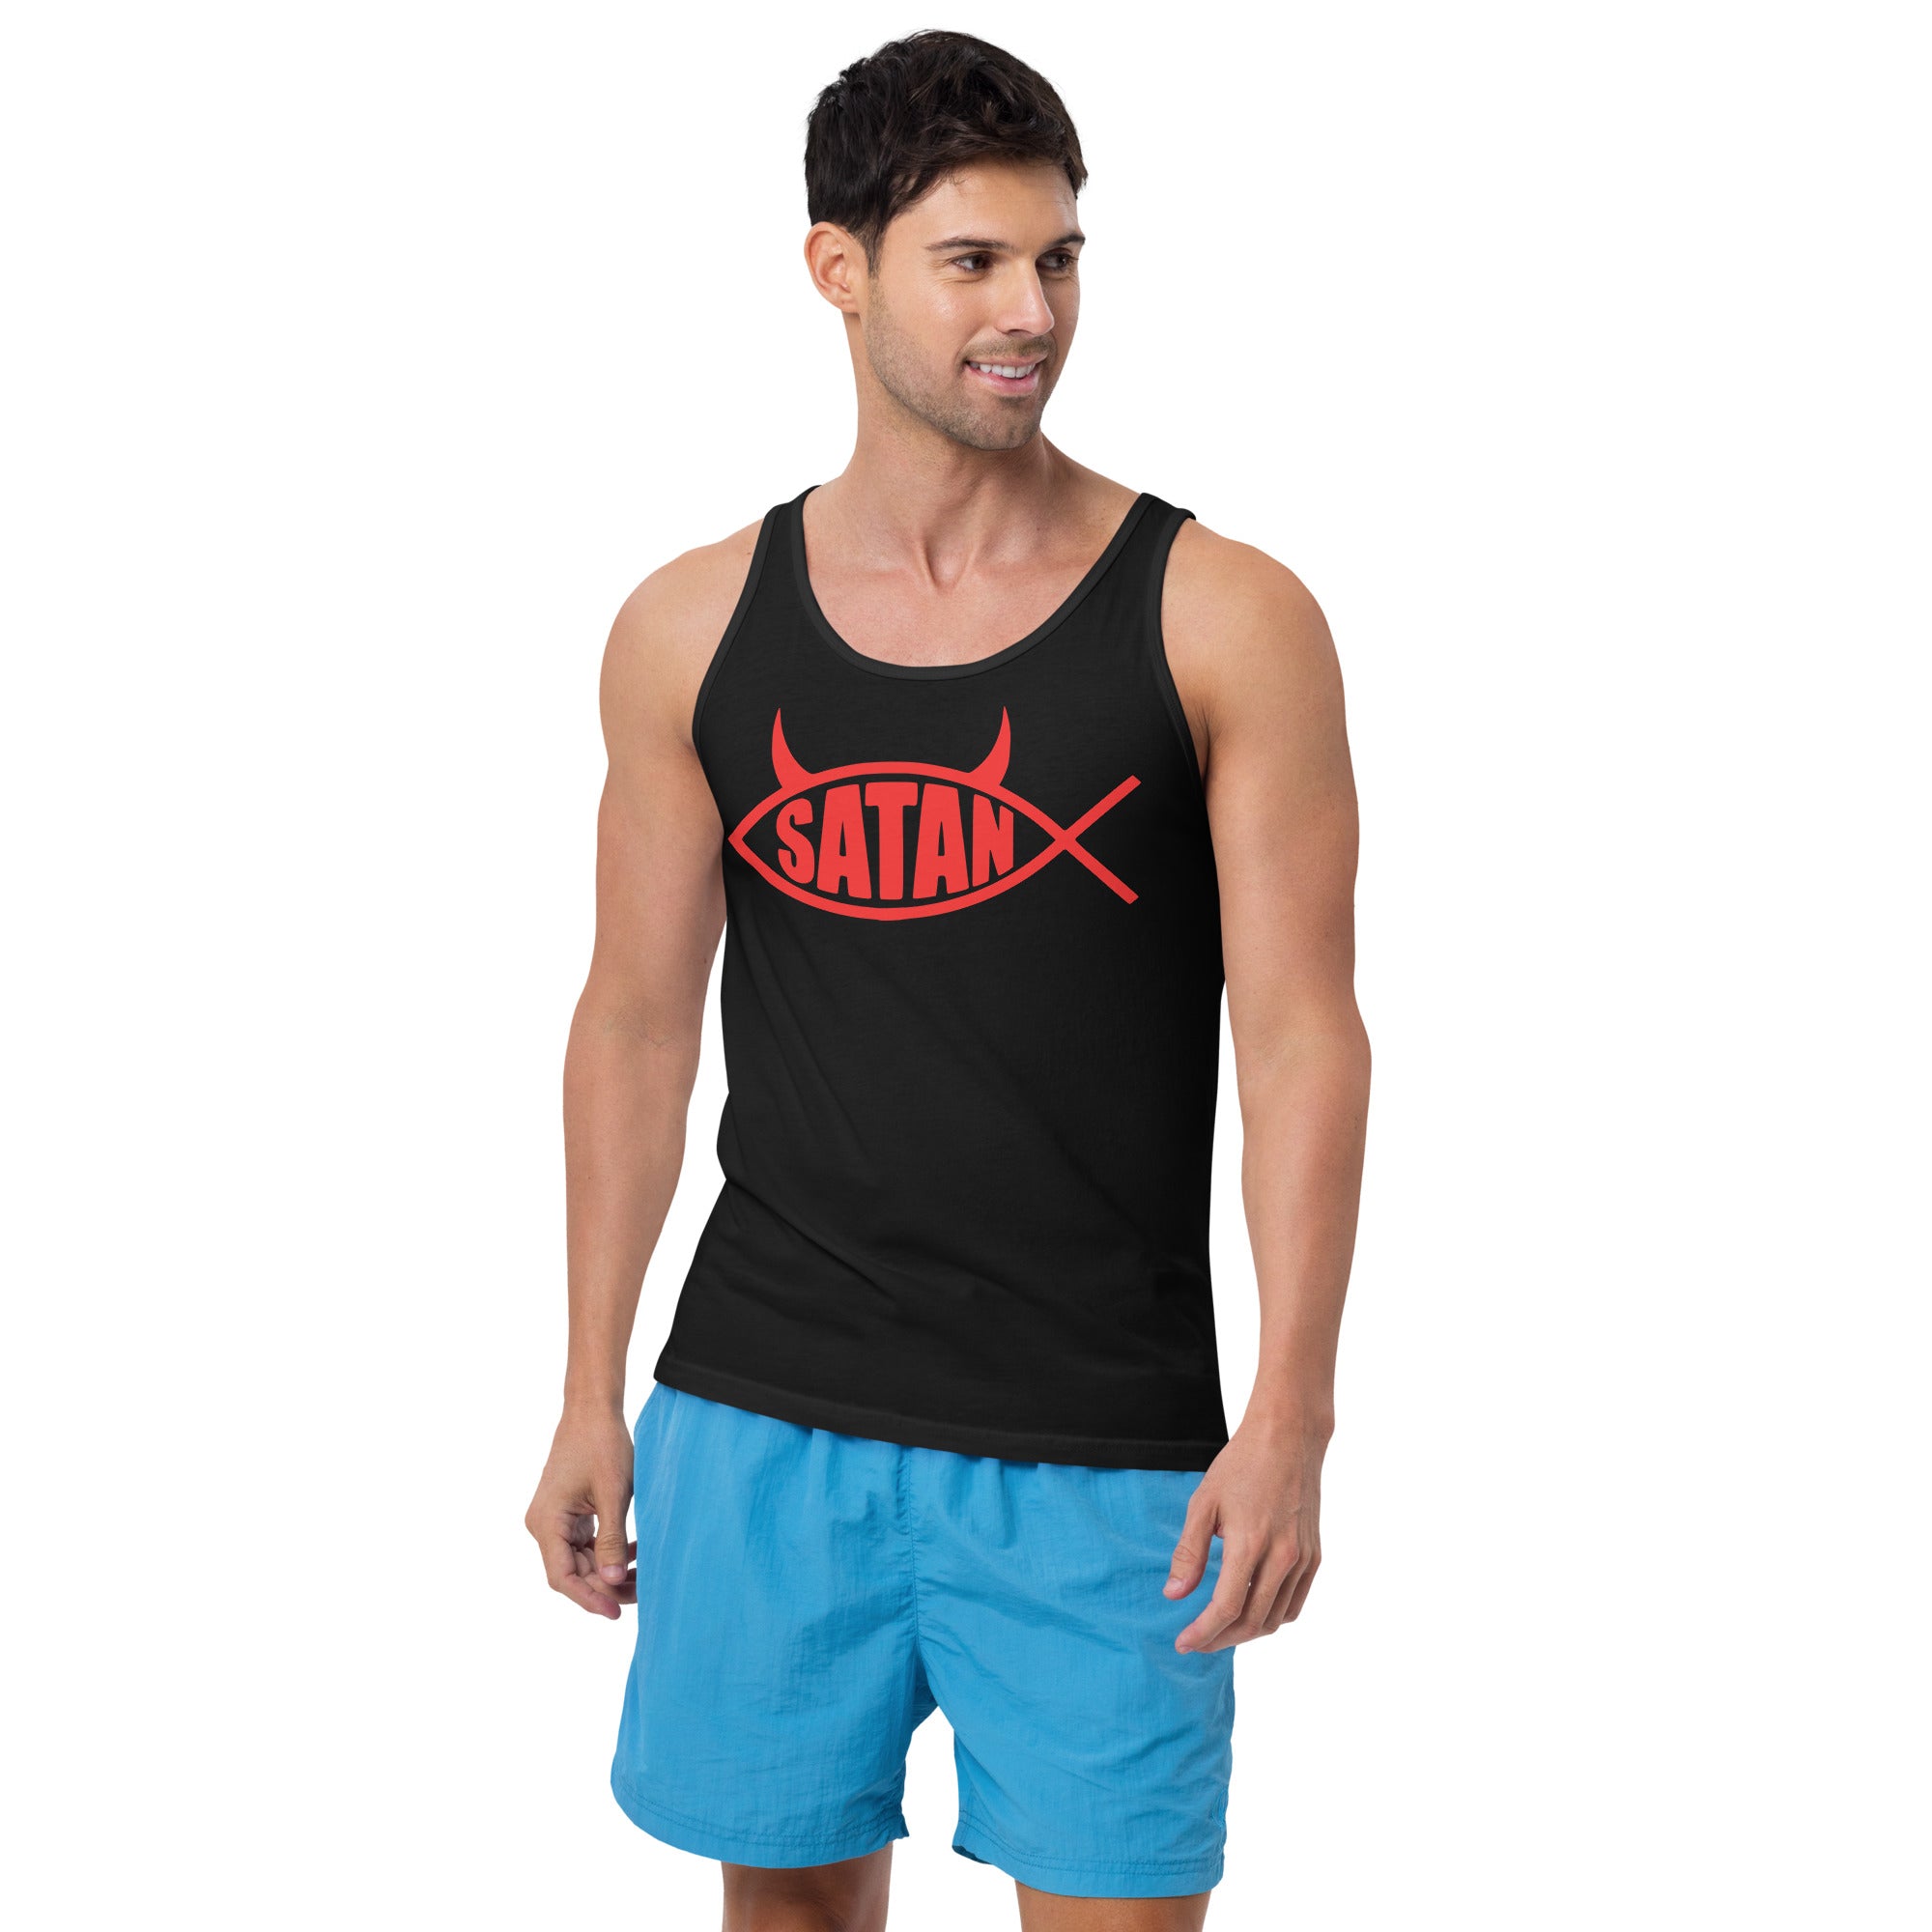 Red Ichthys Satan Fish with Horns Religious Satire Men's Tank Top Shirt